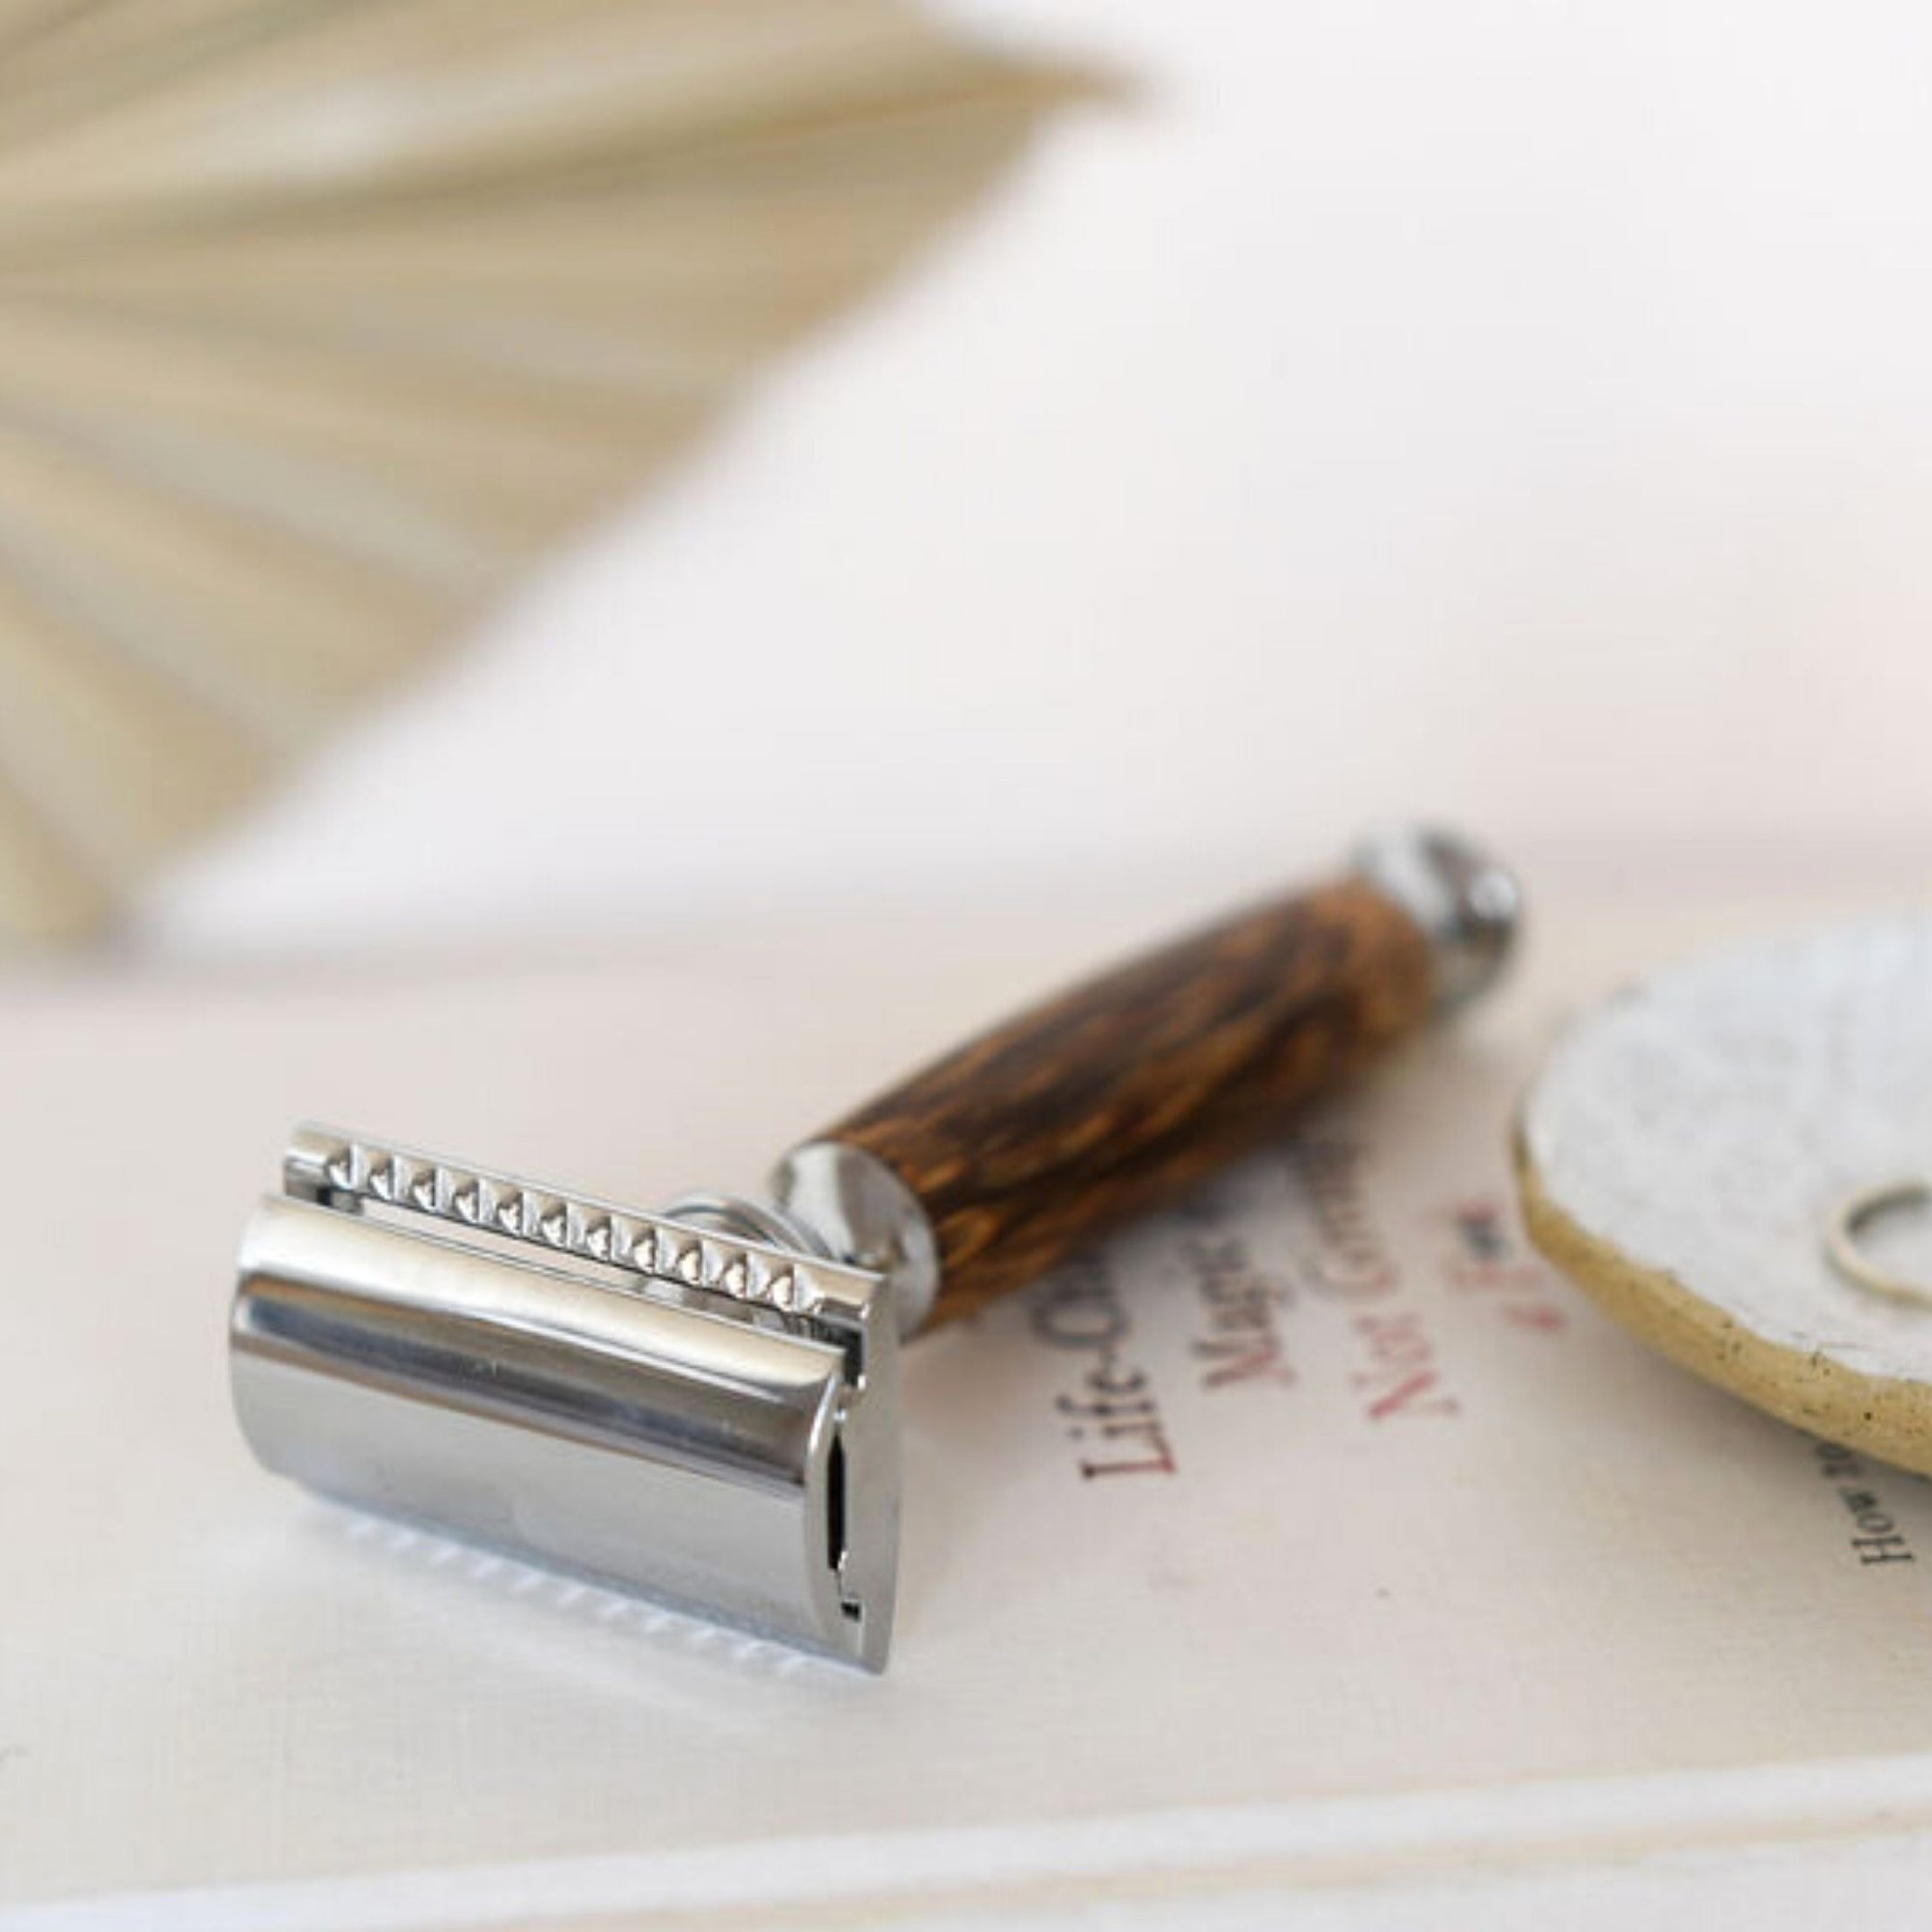 Rediscover Classic Grooming with Safety Razors!